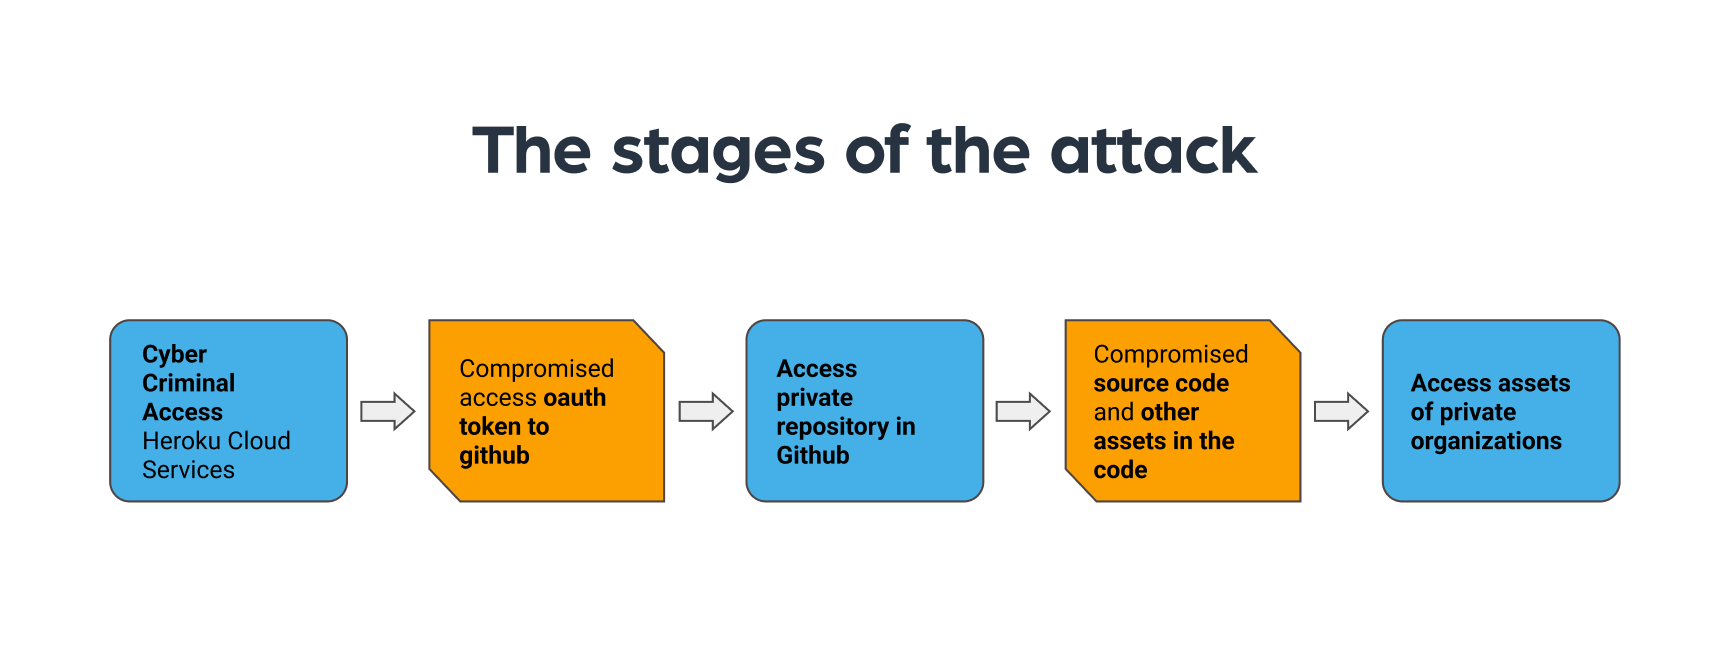 The different stages of the attack